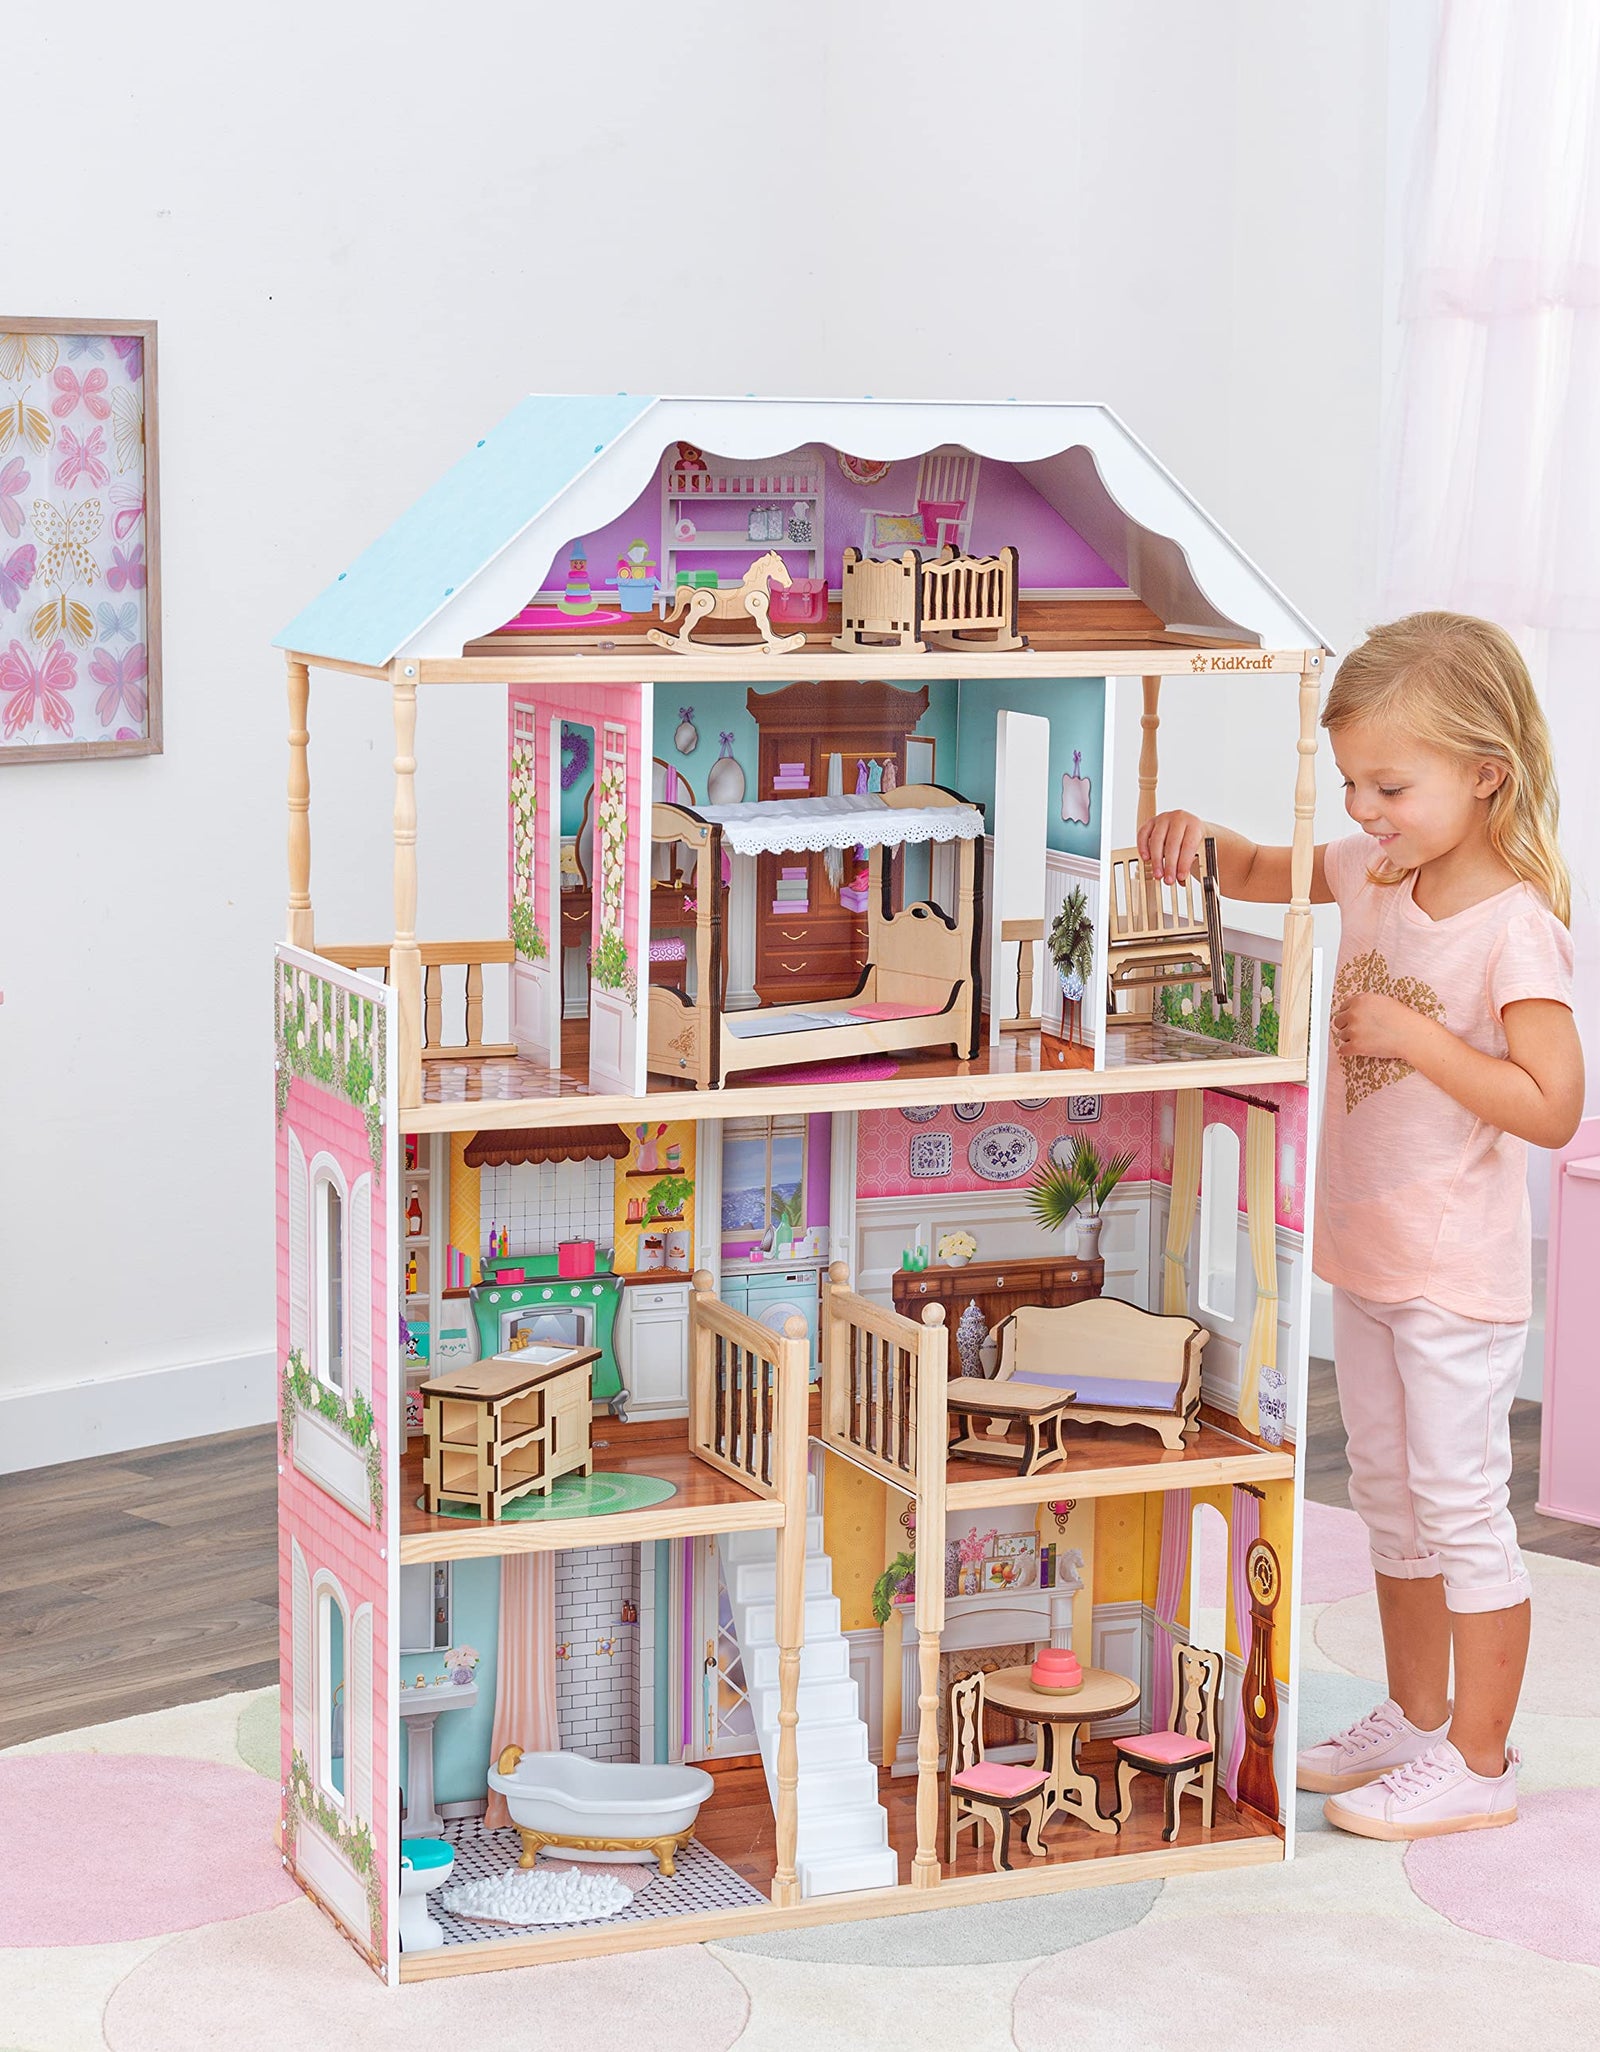 KidKraft Charlotte Classic Wooden Dollhouse with EZ Kraft Assembly, 14-Piece Accessory Set, for 12-Inch Dolls, Gift for Ages 3+